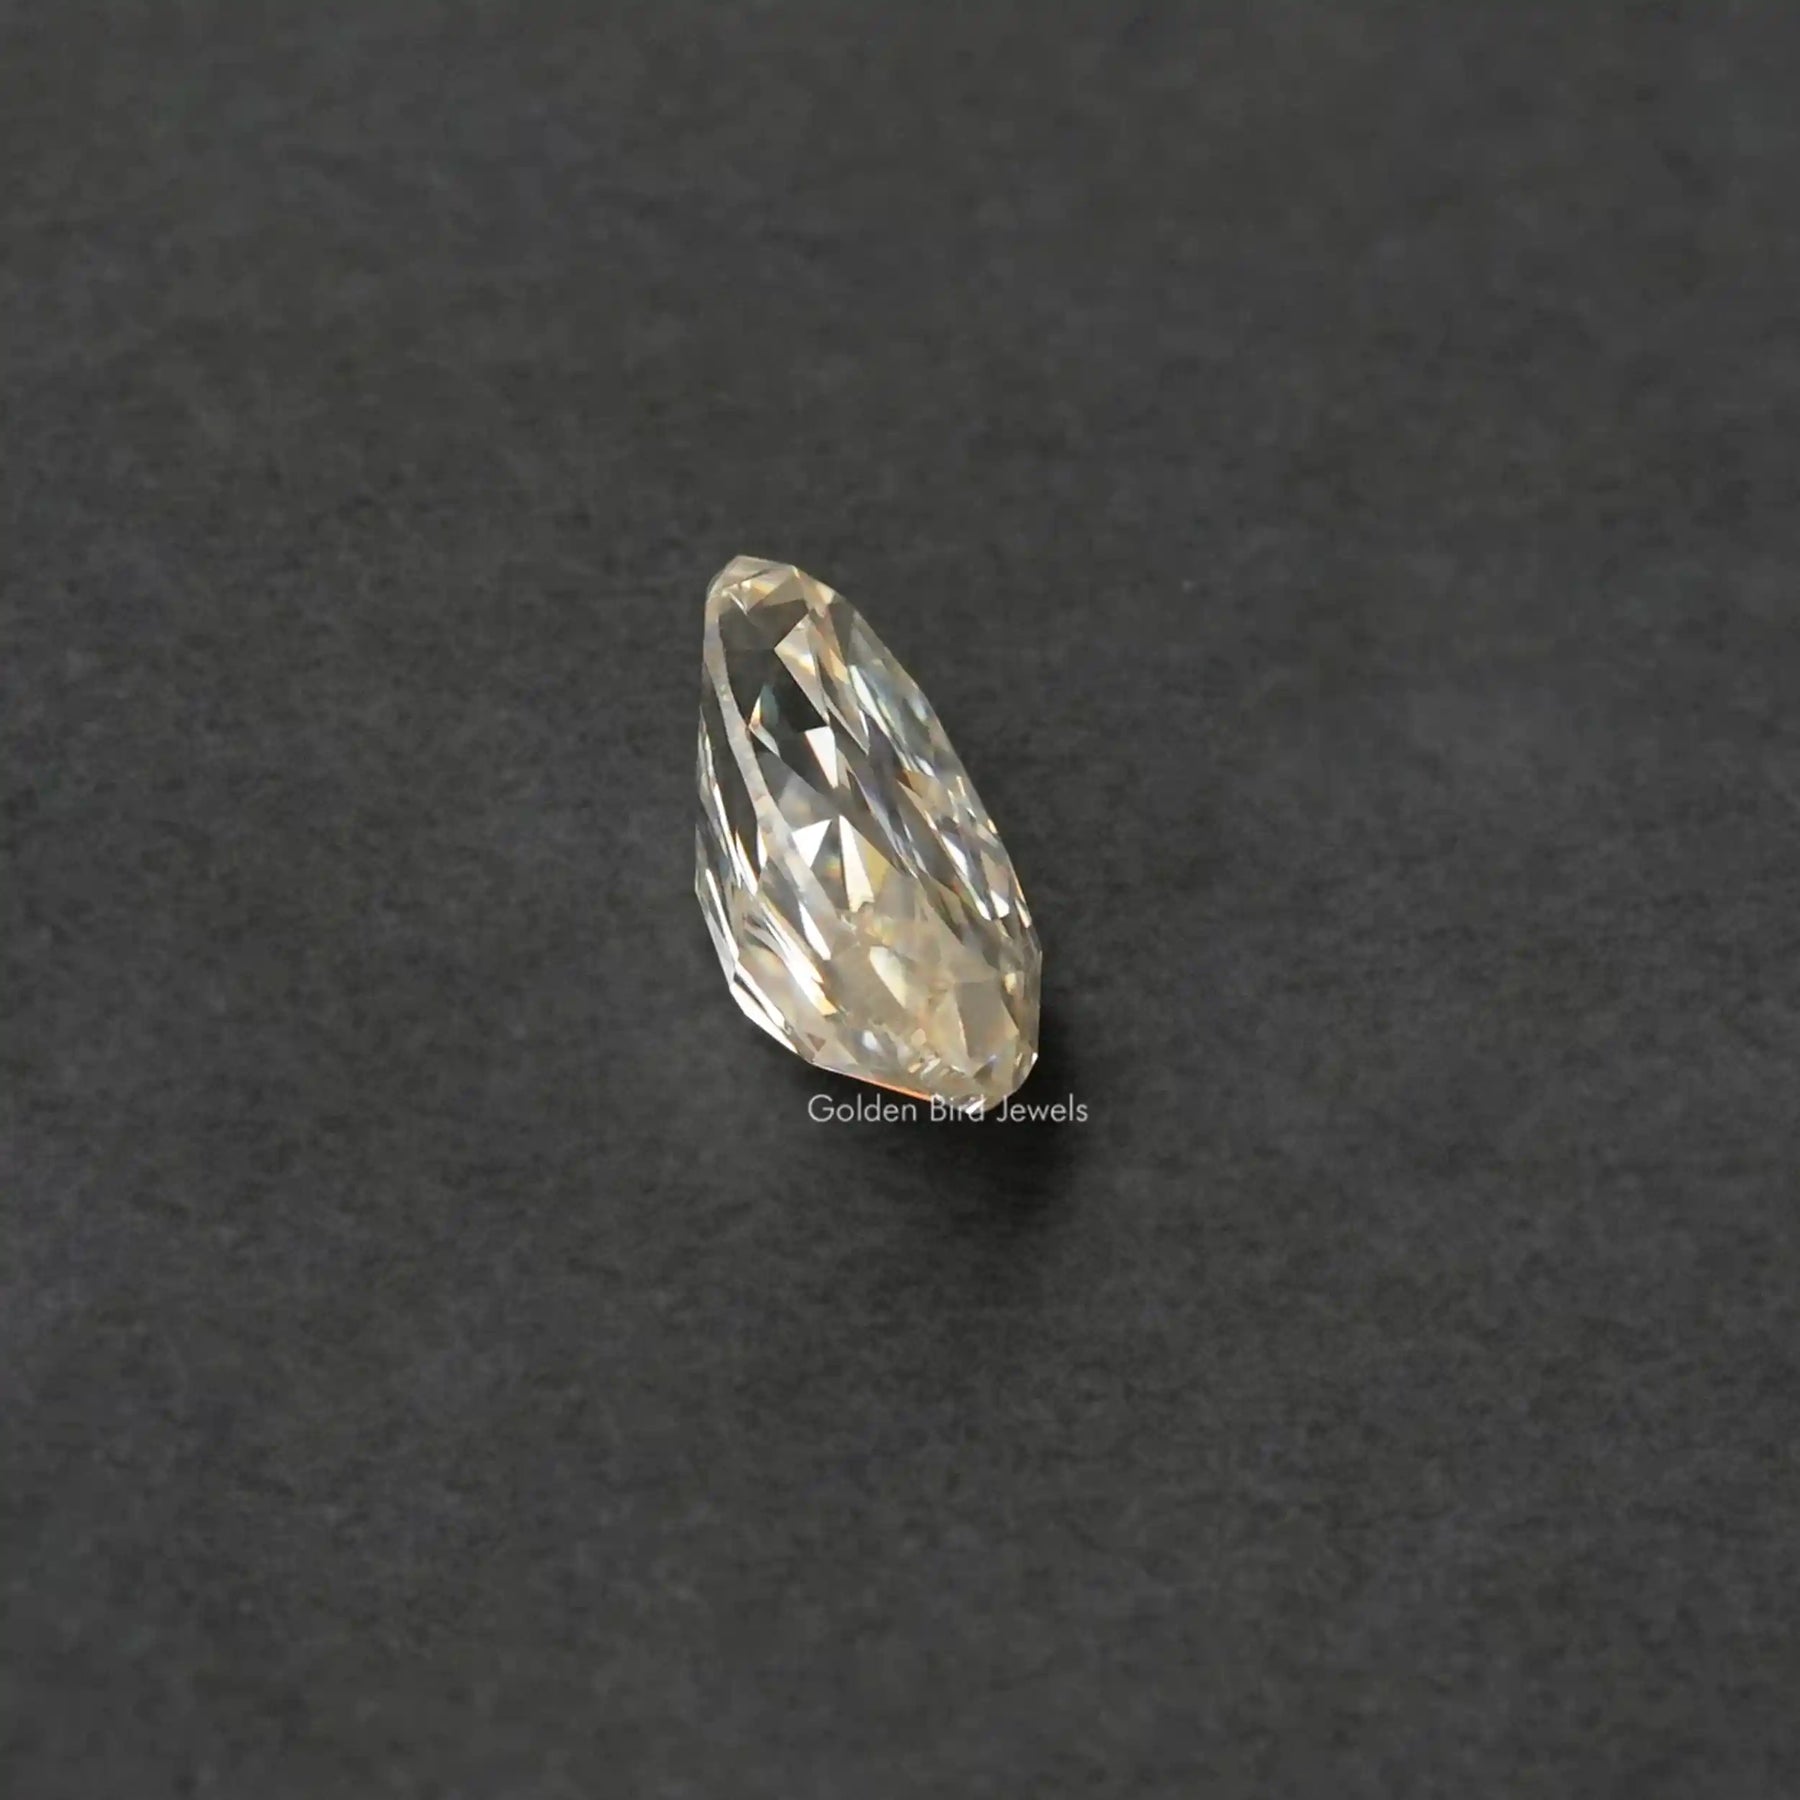 [Side view of moval cut loose moissanite stone]-[Golden Bird Jewels]